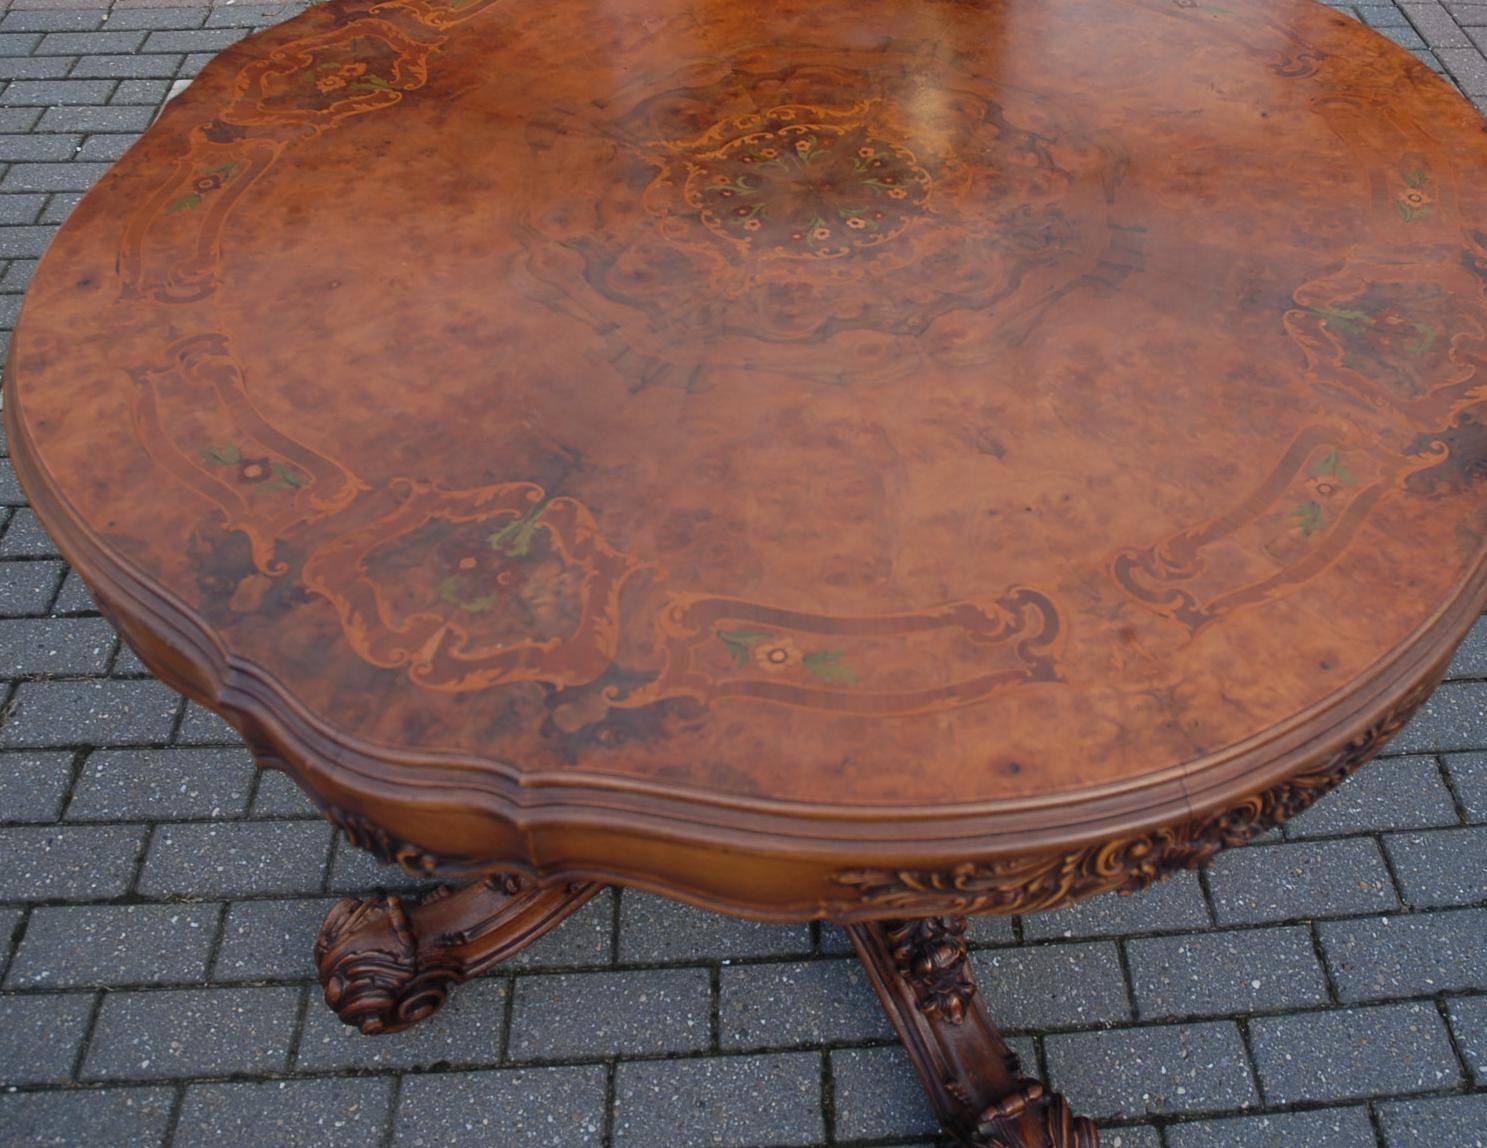 Baroque Revival Vintage Italian Baroque Style Carved Wood Centre Table with Marquetry Inlay Top For Sale